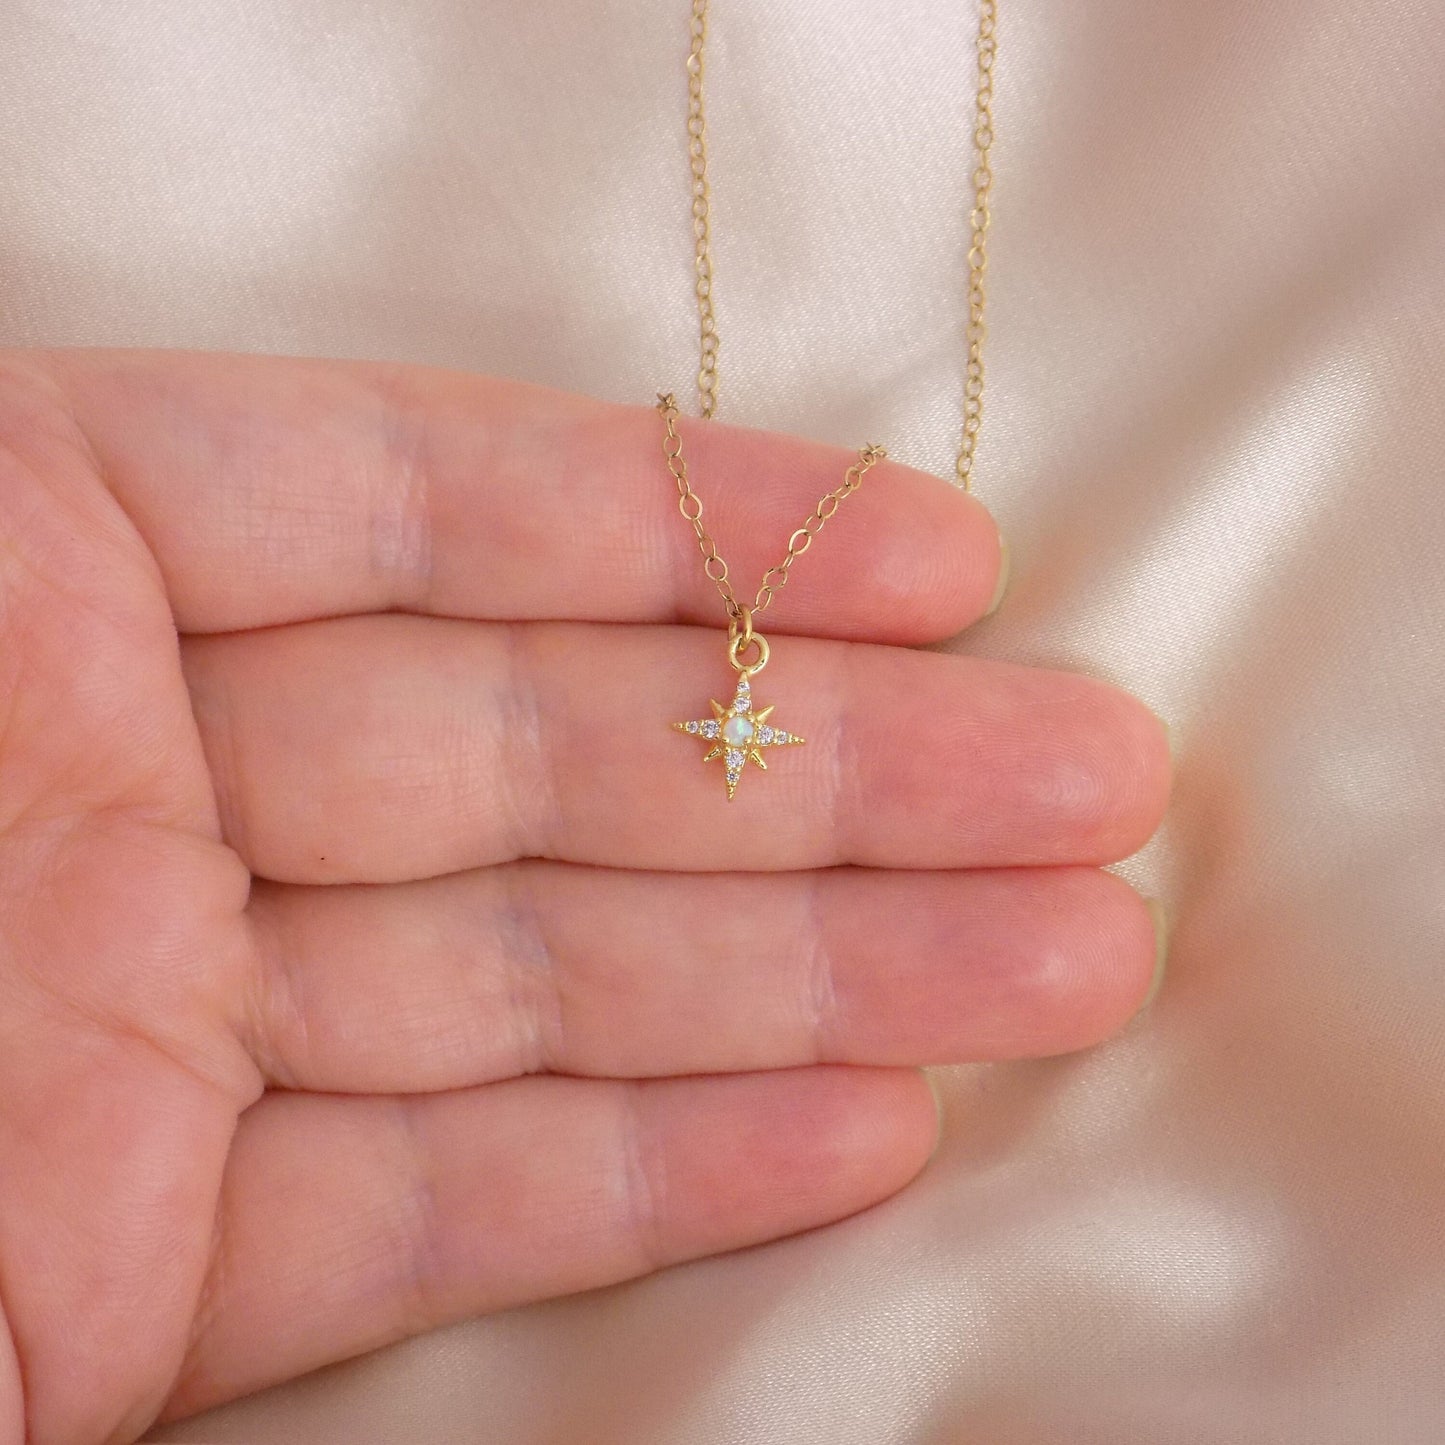 Tiny Opal Starburst Necklace Gold, Cubic Zirconia Northstar Charm For Women, M7-130